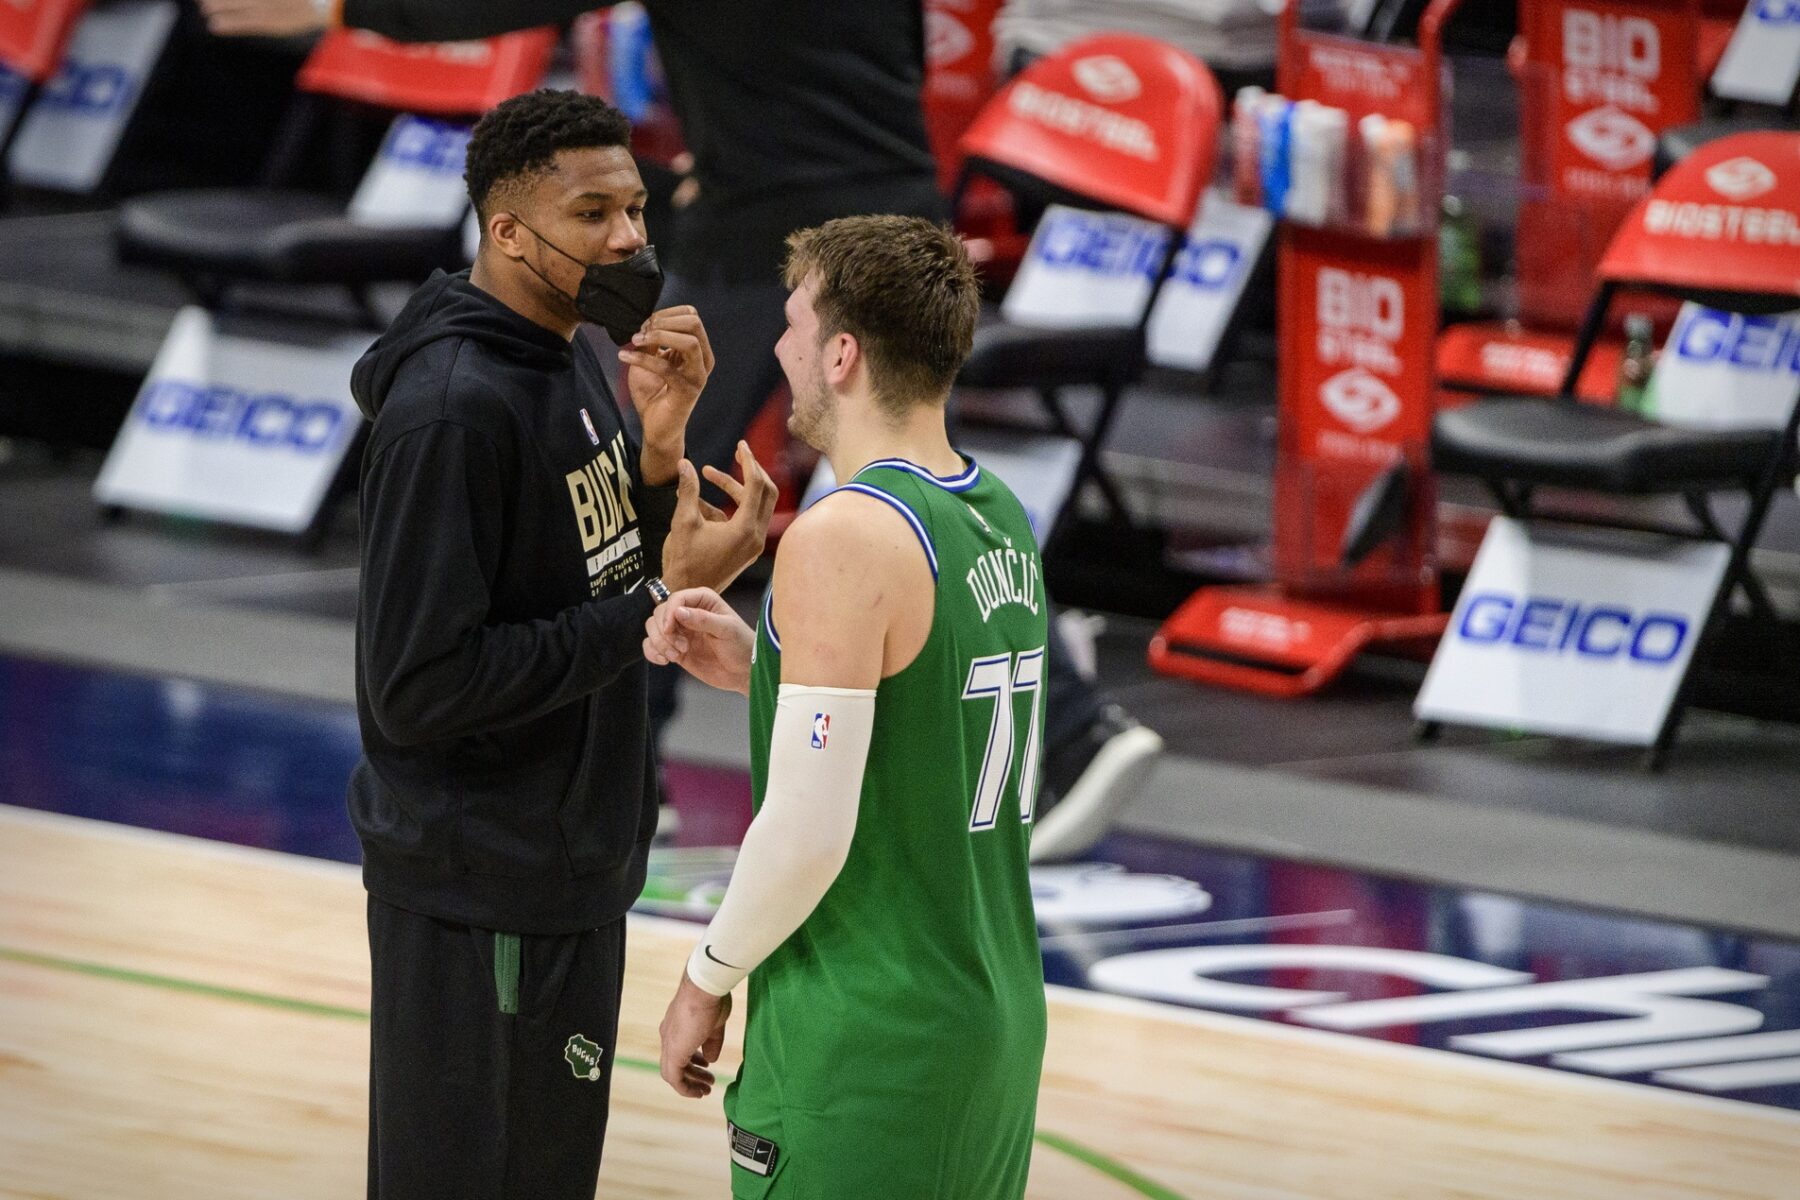 Giannis Antetokounmpo and Luka Doncic